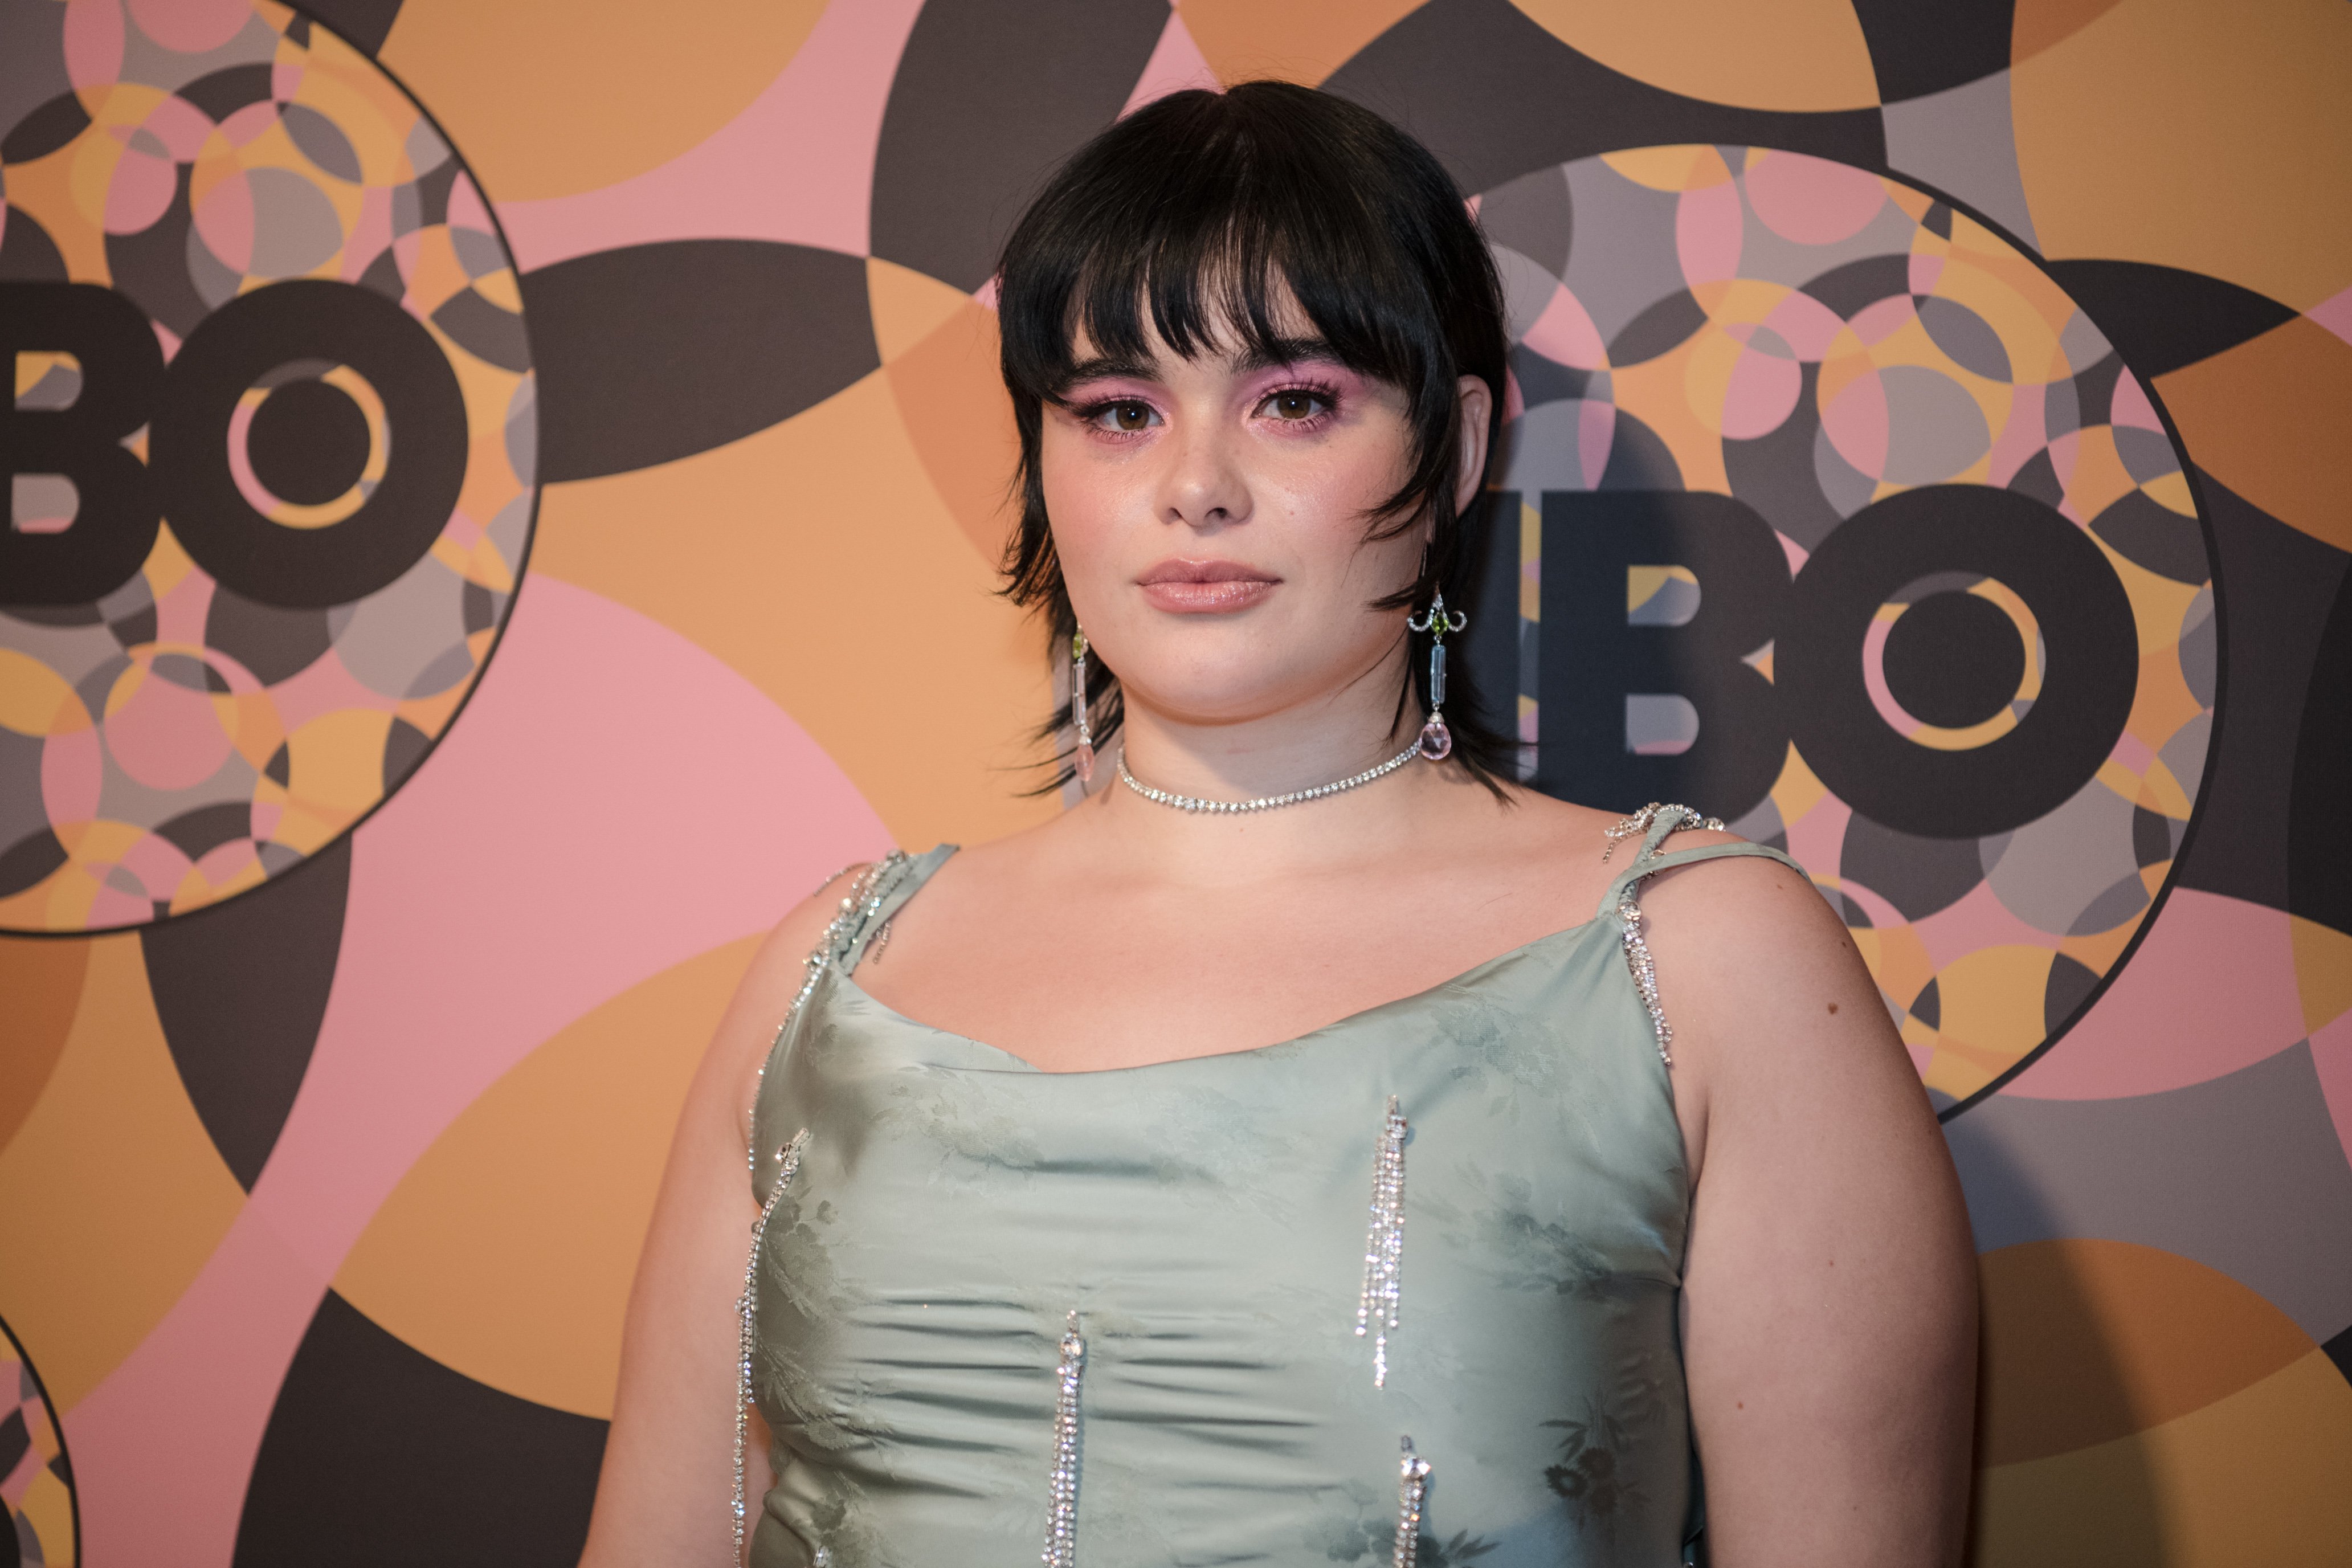 Model Barbie Ferreira arrives at HBO's Official Golden Globes After Party at Circa 55 Restaurant on January 05, 2020 in Los Angeles, California | Photo: Getty Images